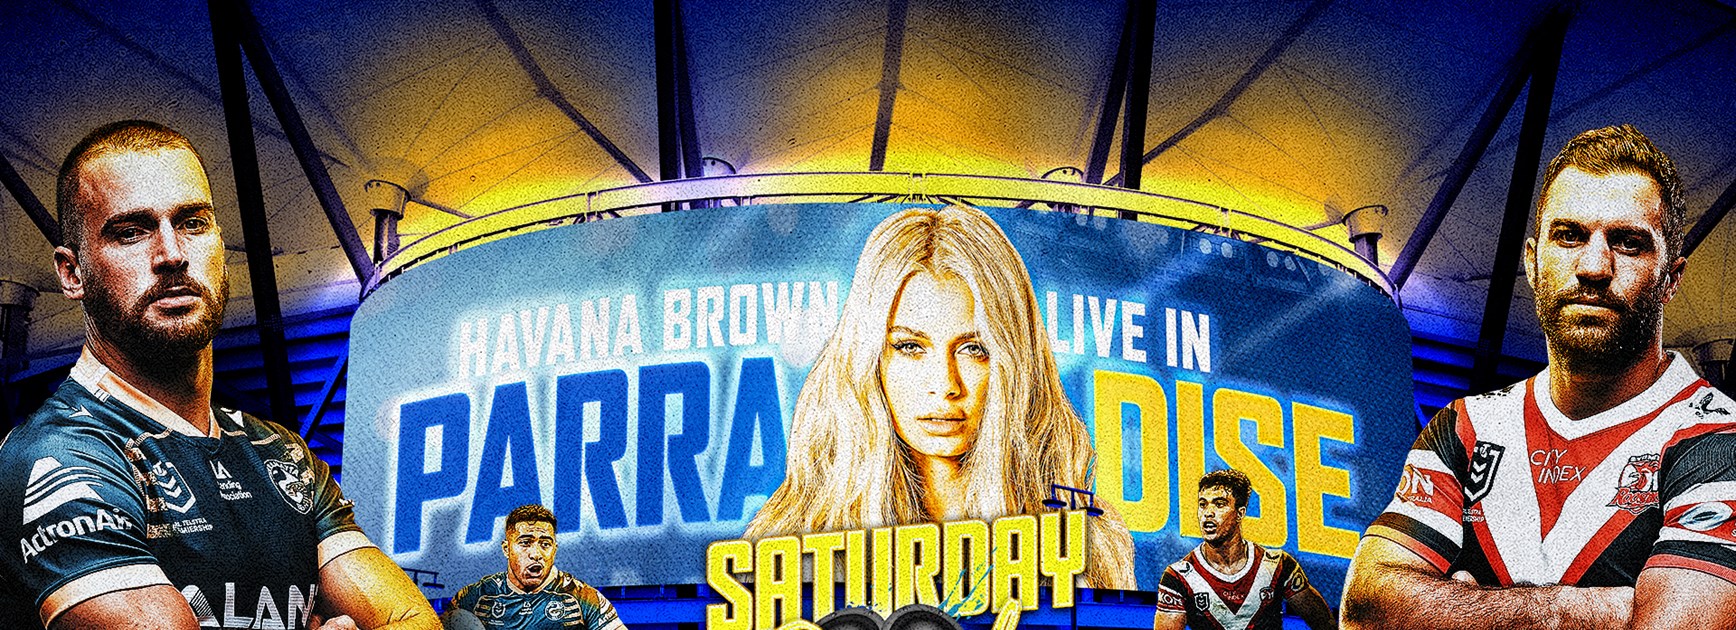 DJ Havana Brown joins Eels to bring game day alive at Saturday Sounds